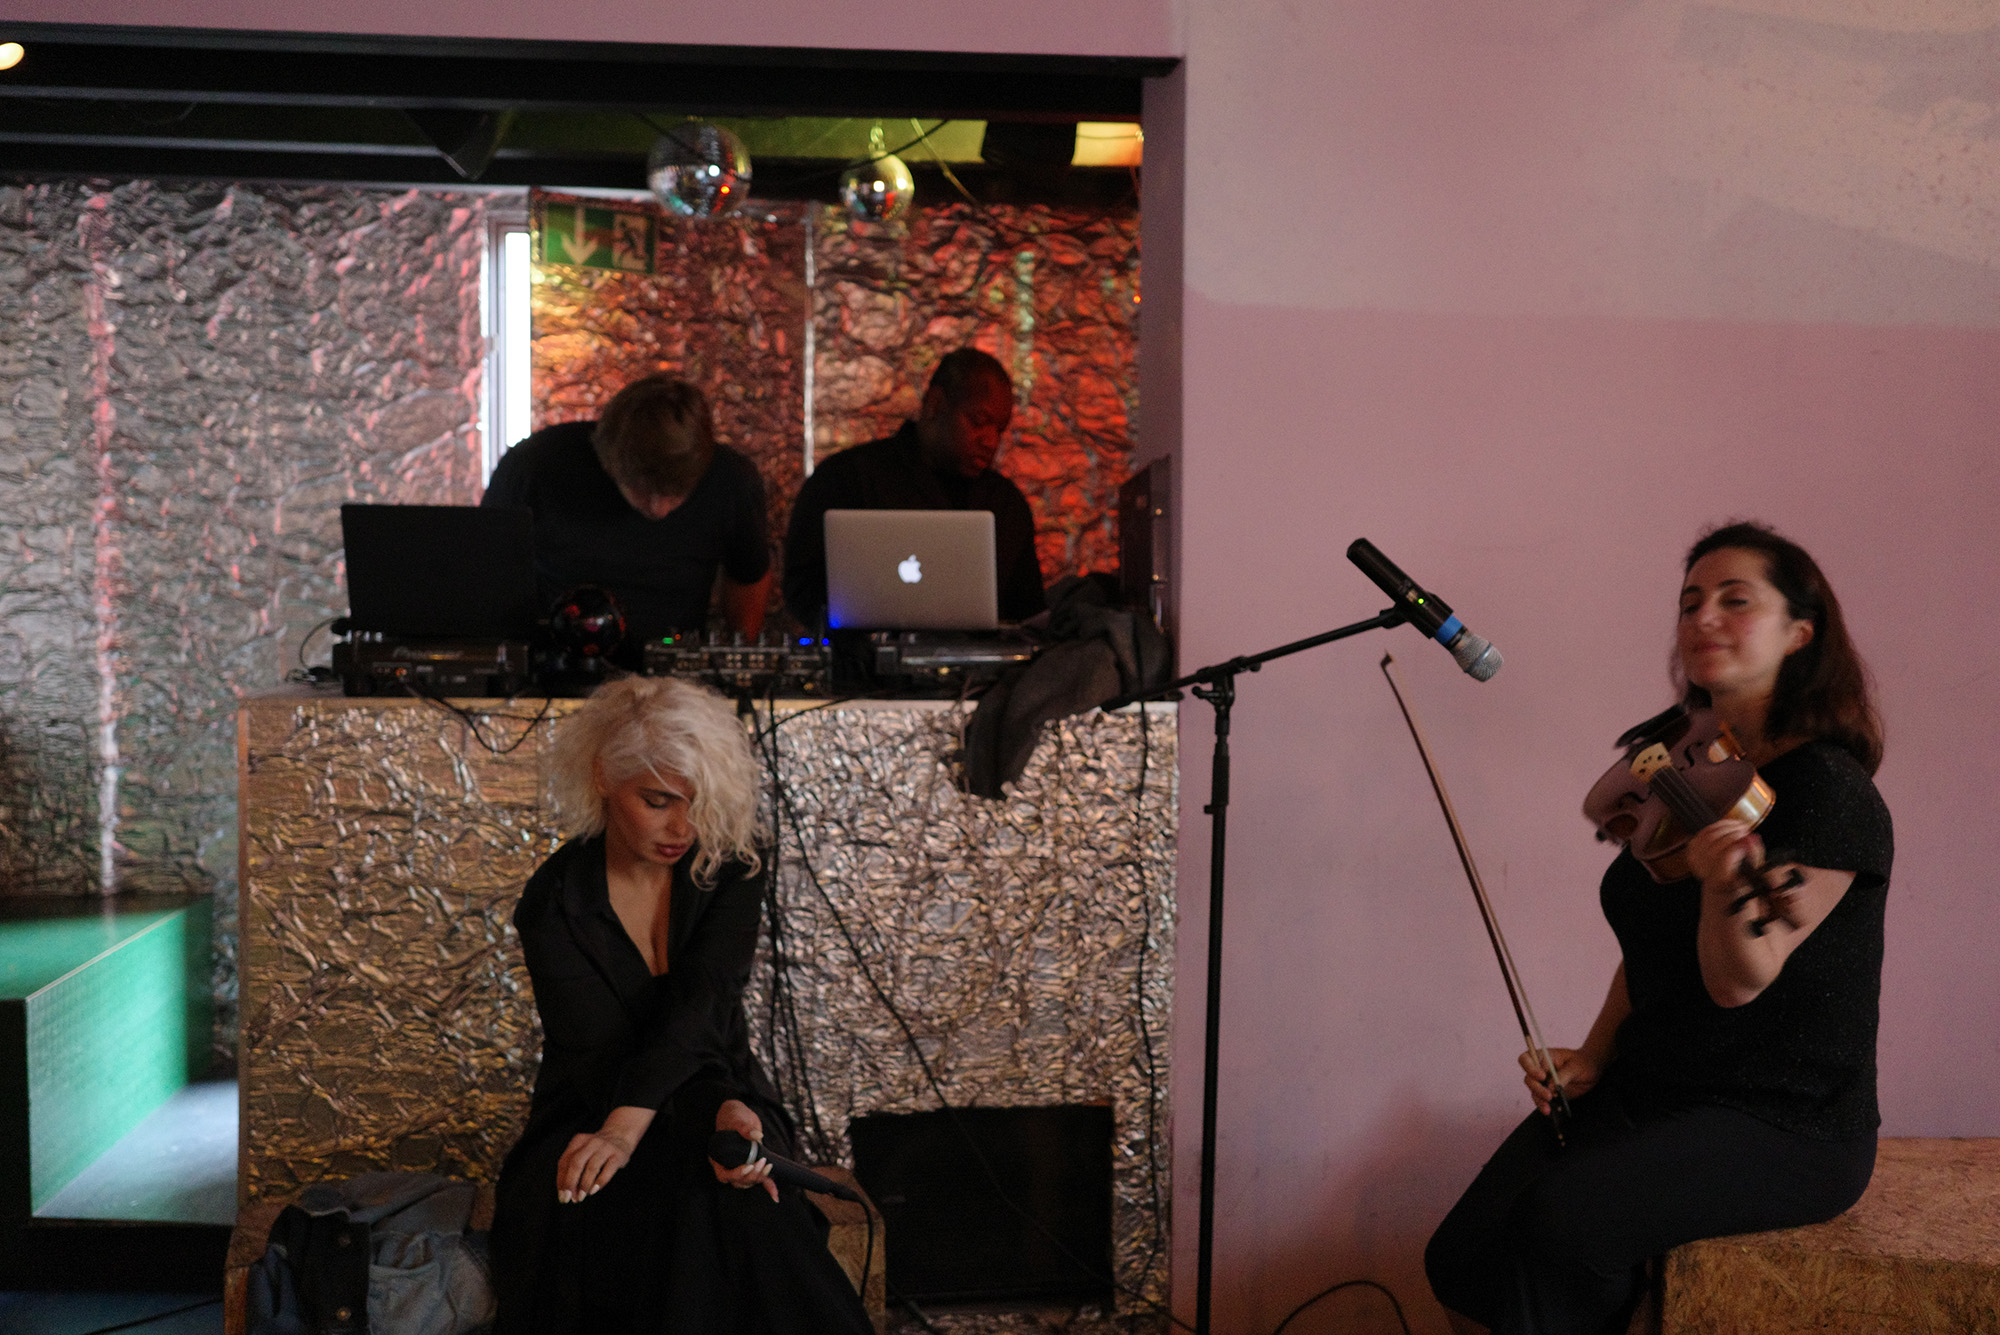 Photo: A small studio scene with a individual sitting by a mic on the right hand side. In the center, another individual with a funky haircut sits in front of another microphone.